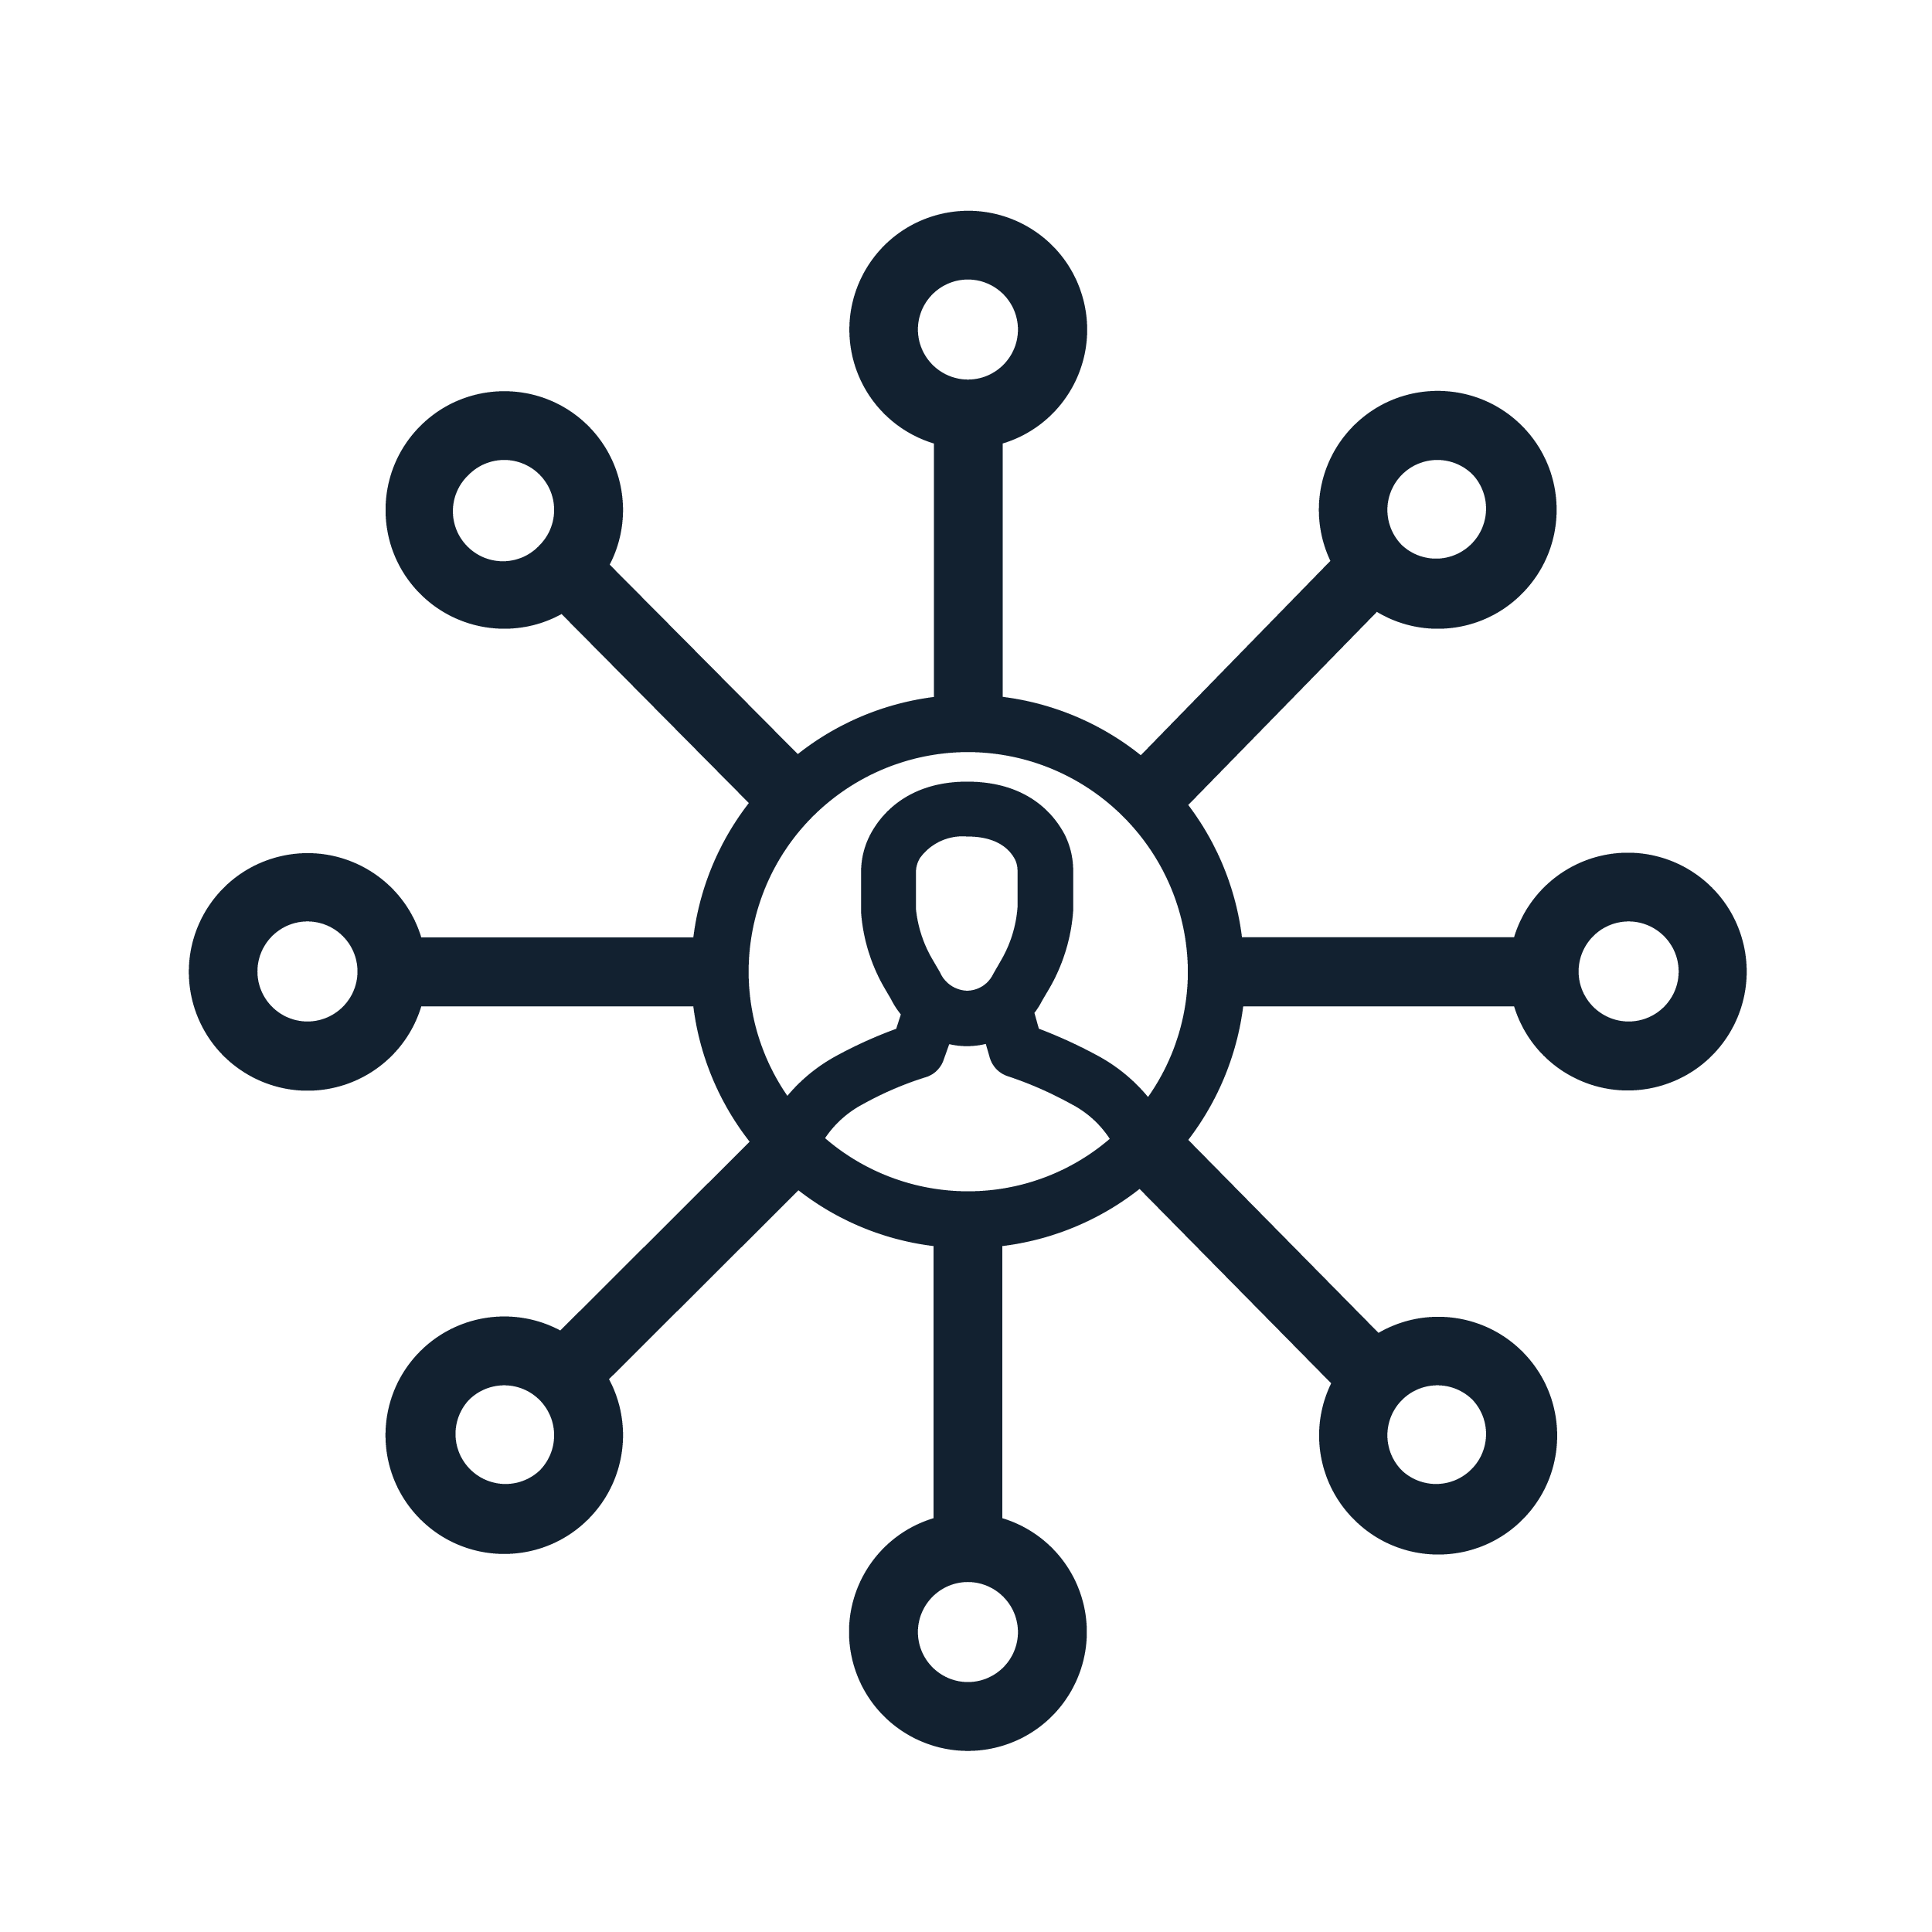 Icon of single, central individual connected to points surrounding them